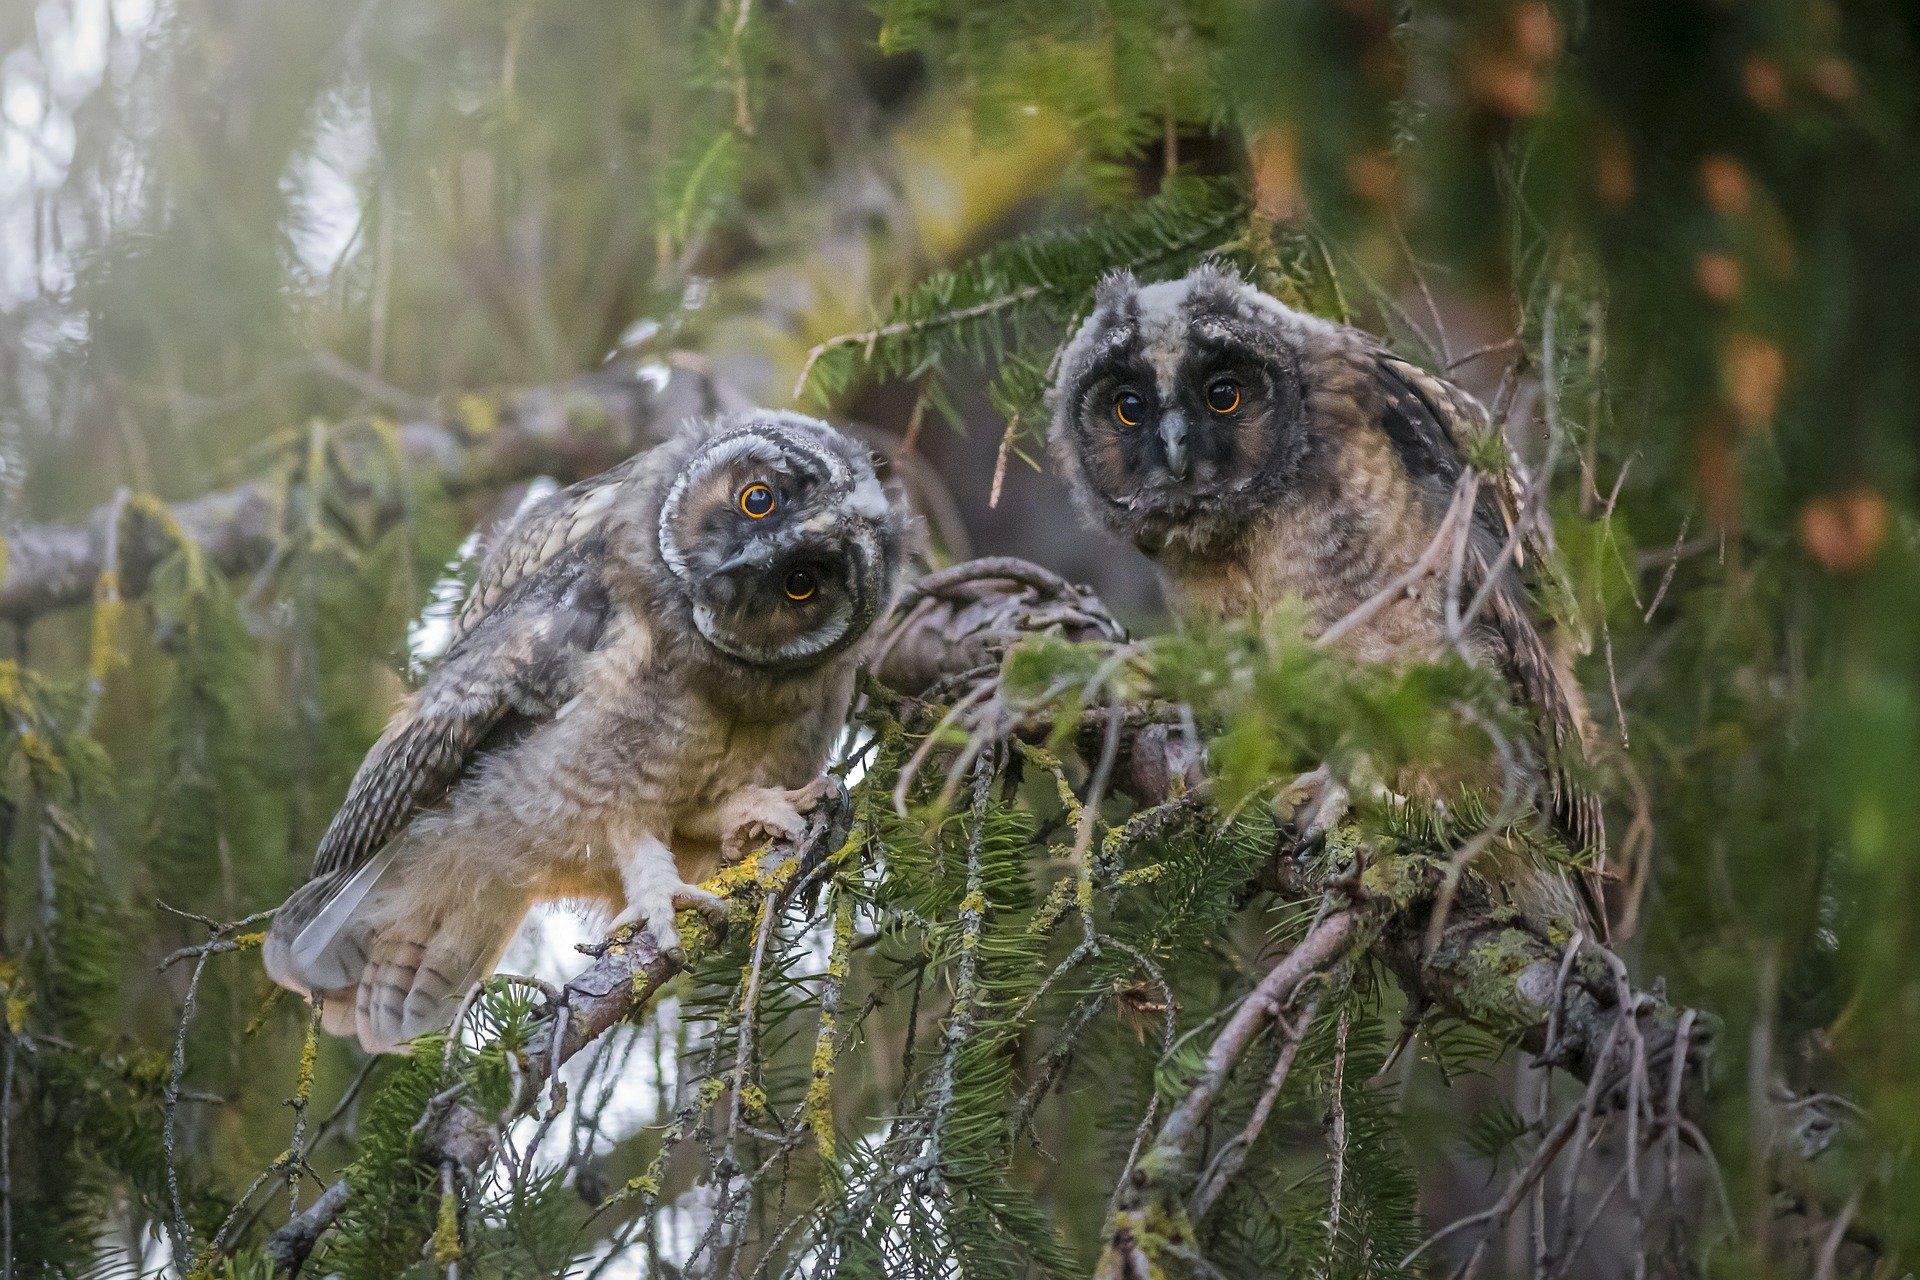 Two owls are perched on a tree branch.